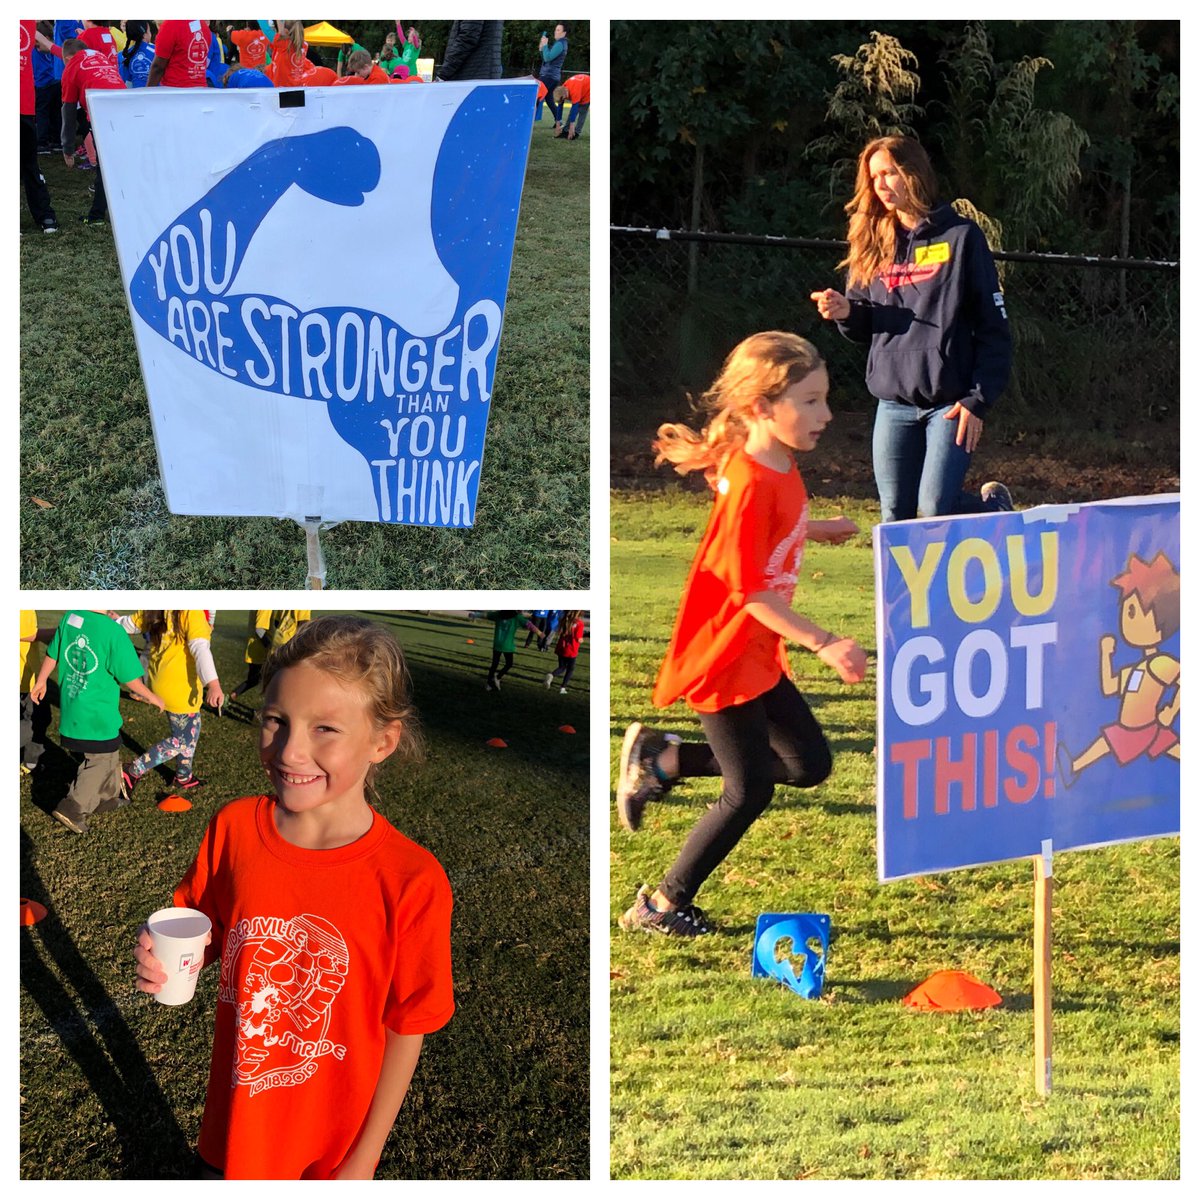 So proud of our @pvespride community this morning! #runkatierun #PrideStride